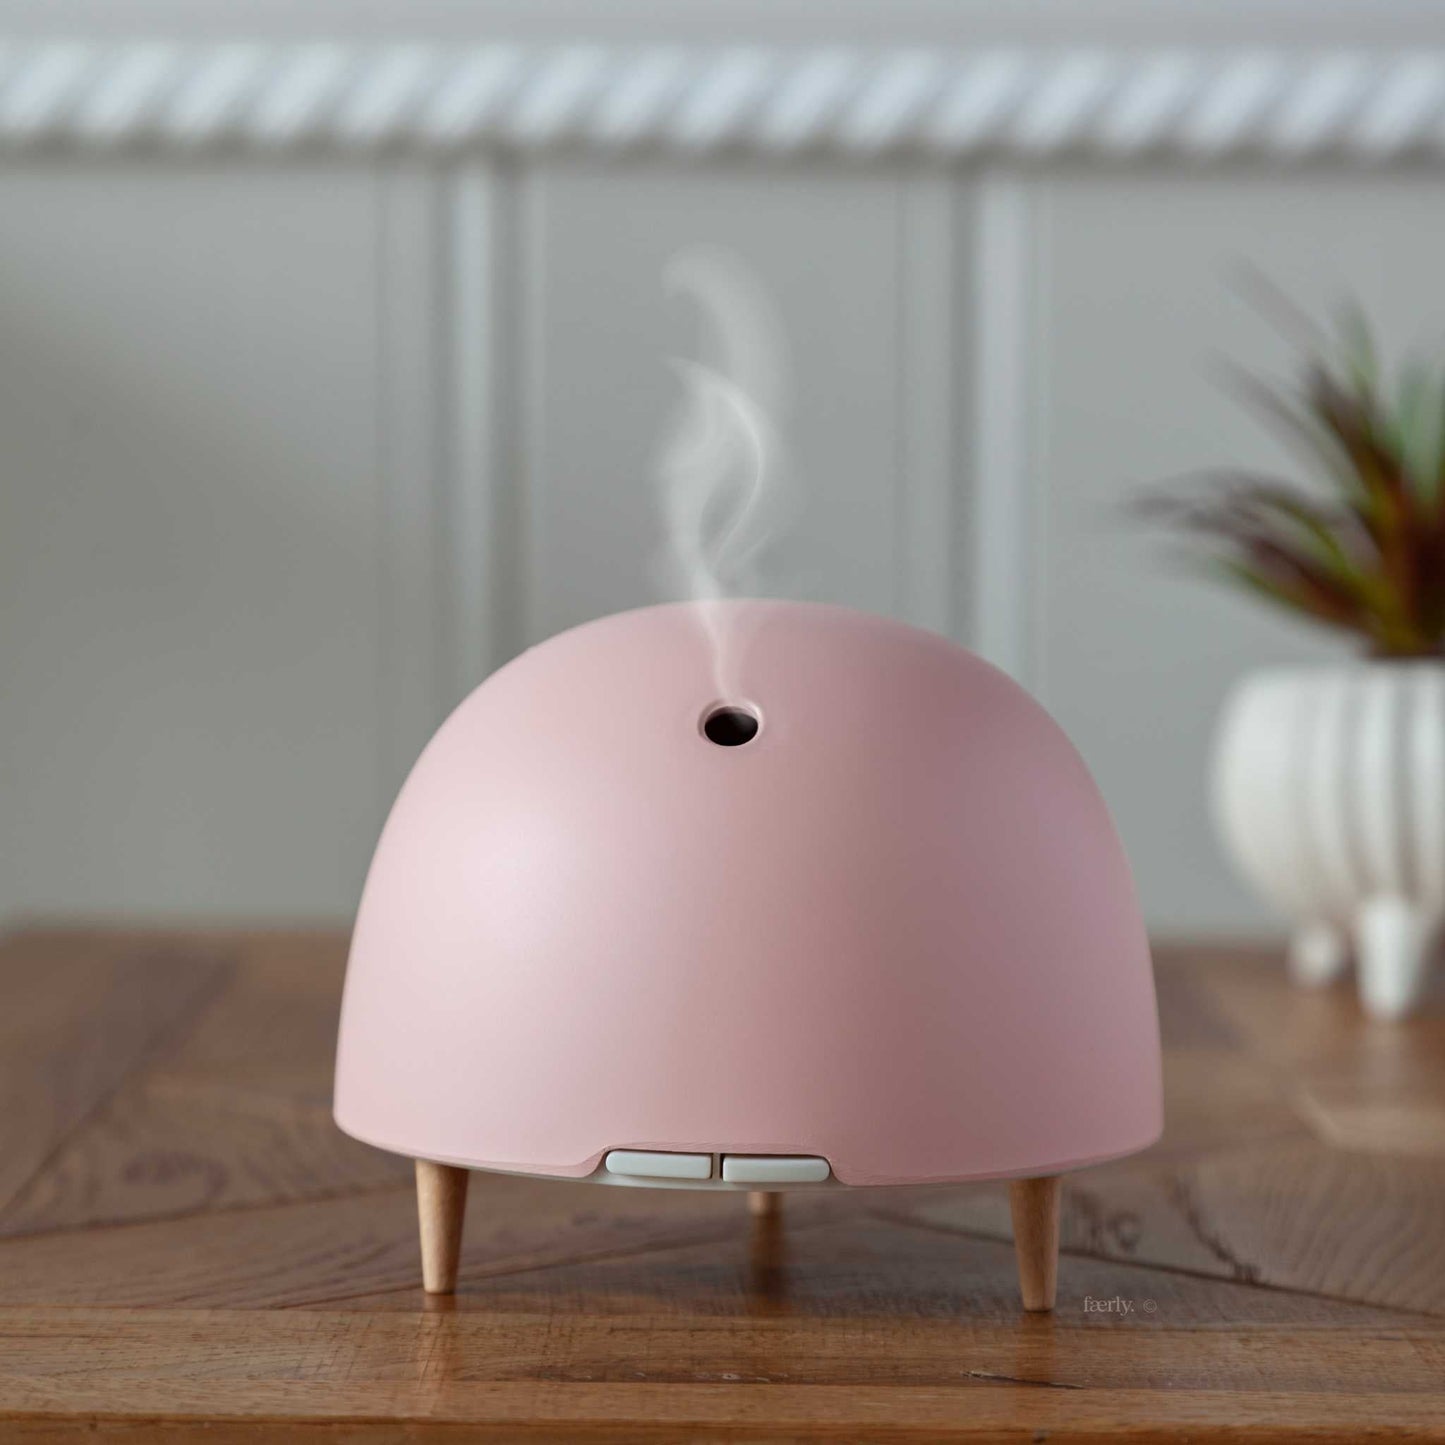 The Nature of Things Essential Oil Essential Oil Diffuser - Maël - Pink - The Nature of Things